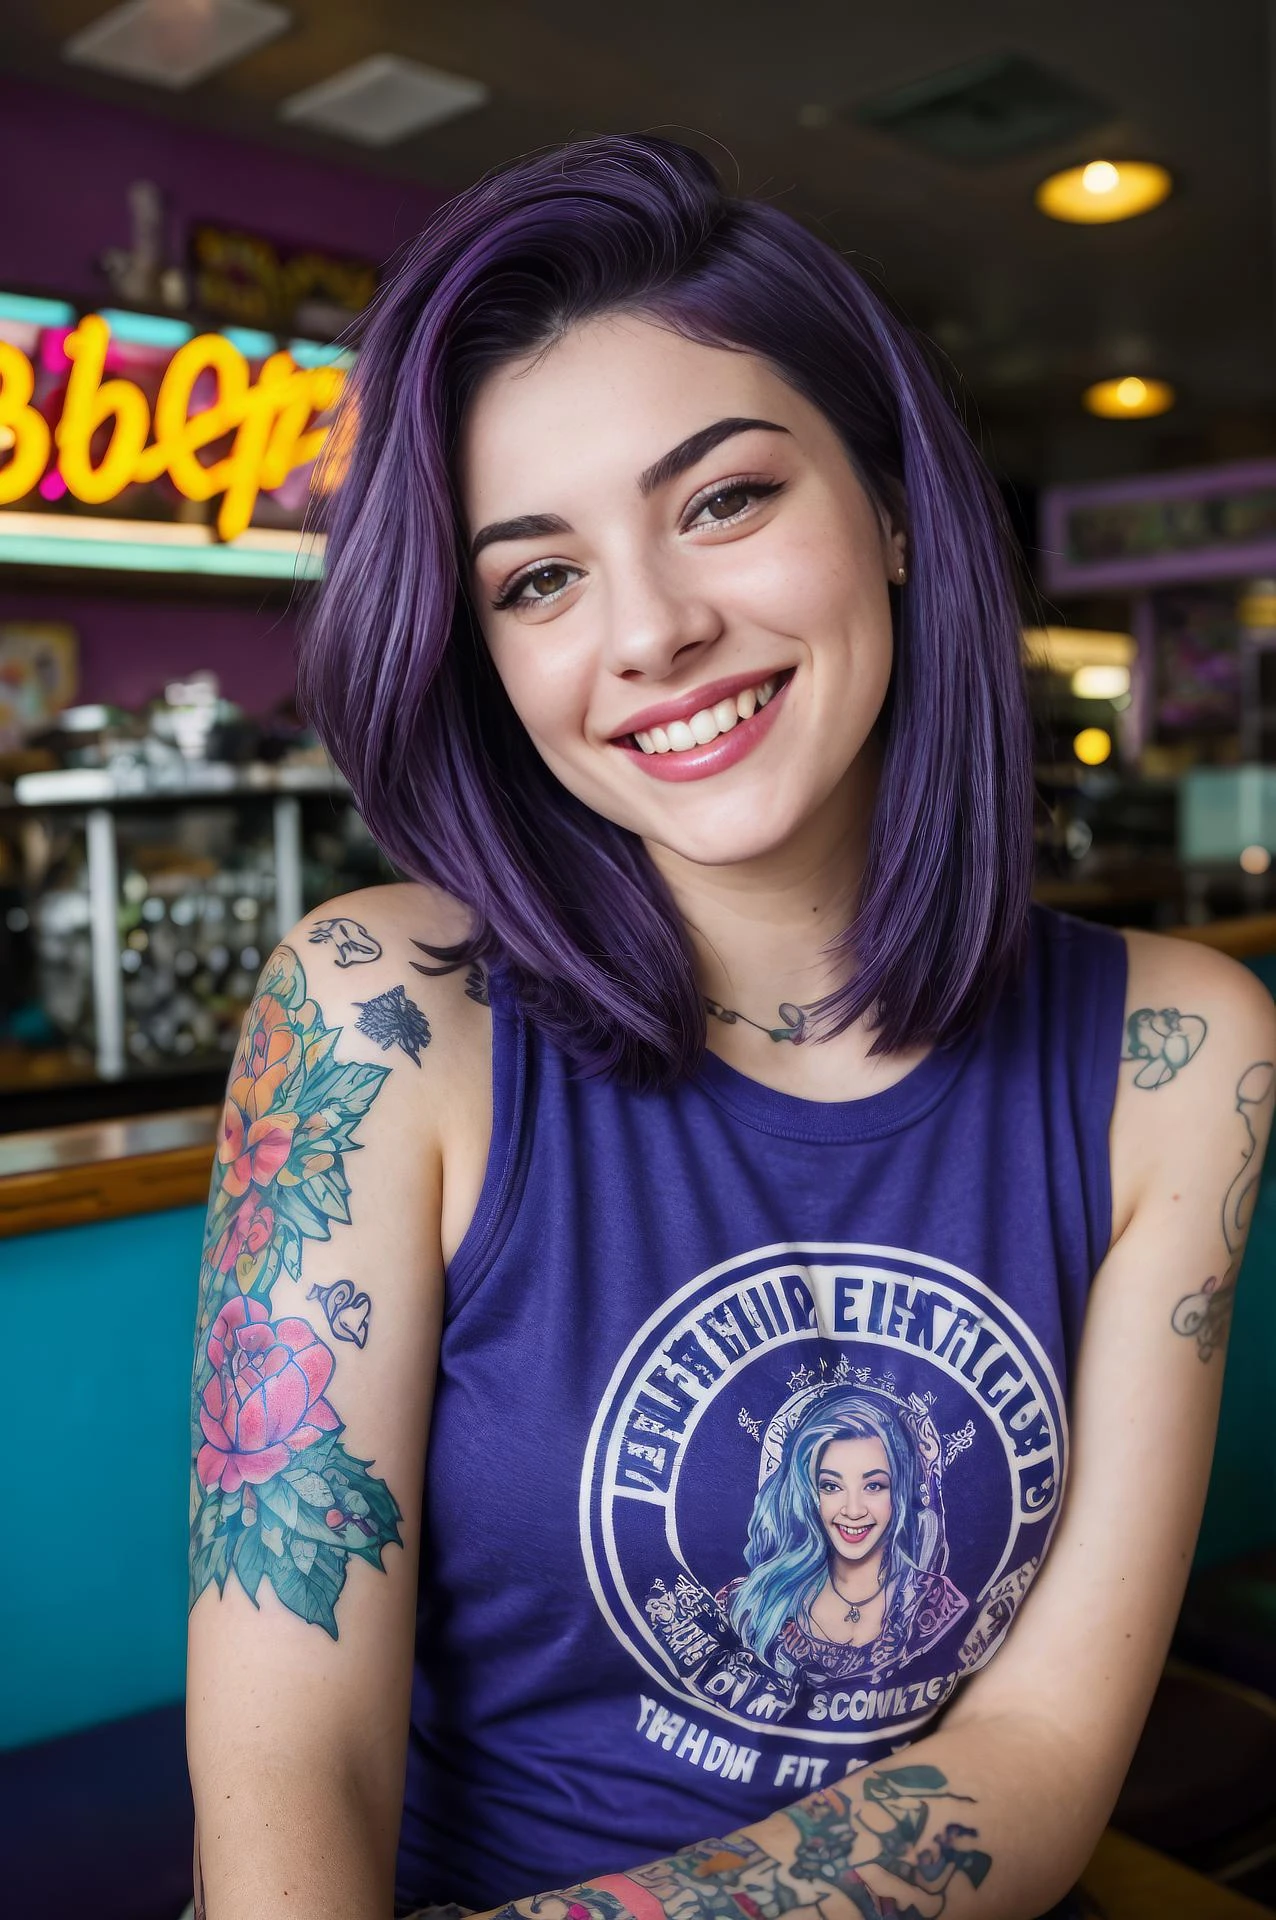 street photography photo of a young woman with purple hair, smile, happy, cute t-shirt, tattoos on her arms, sitting in a 50s diner 